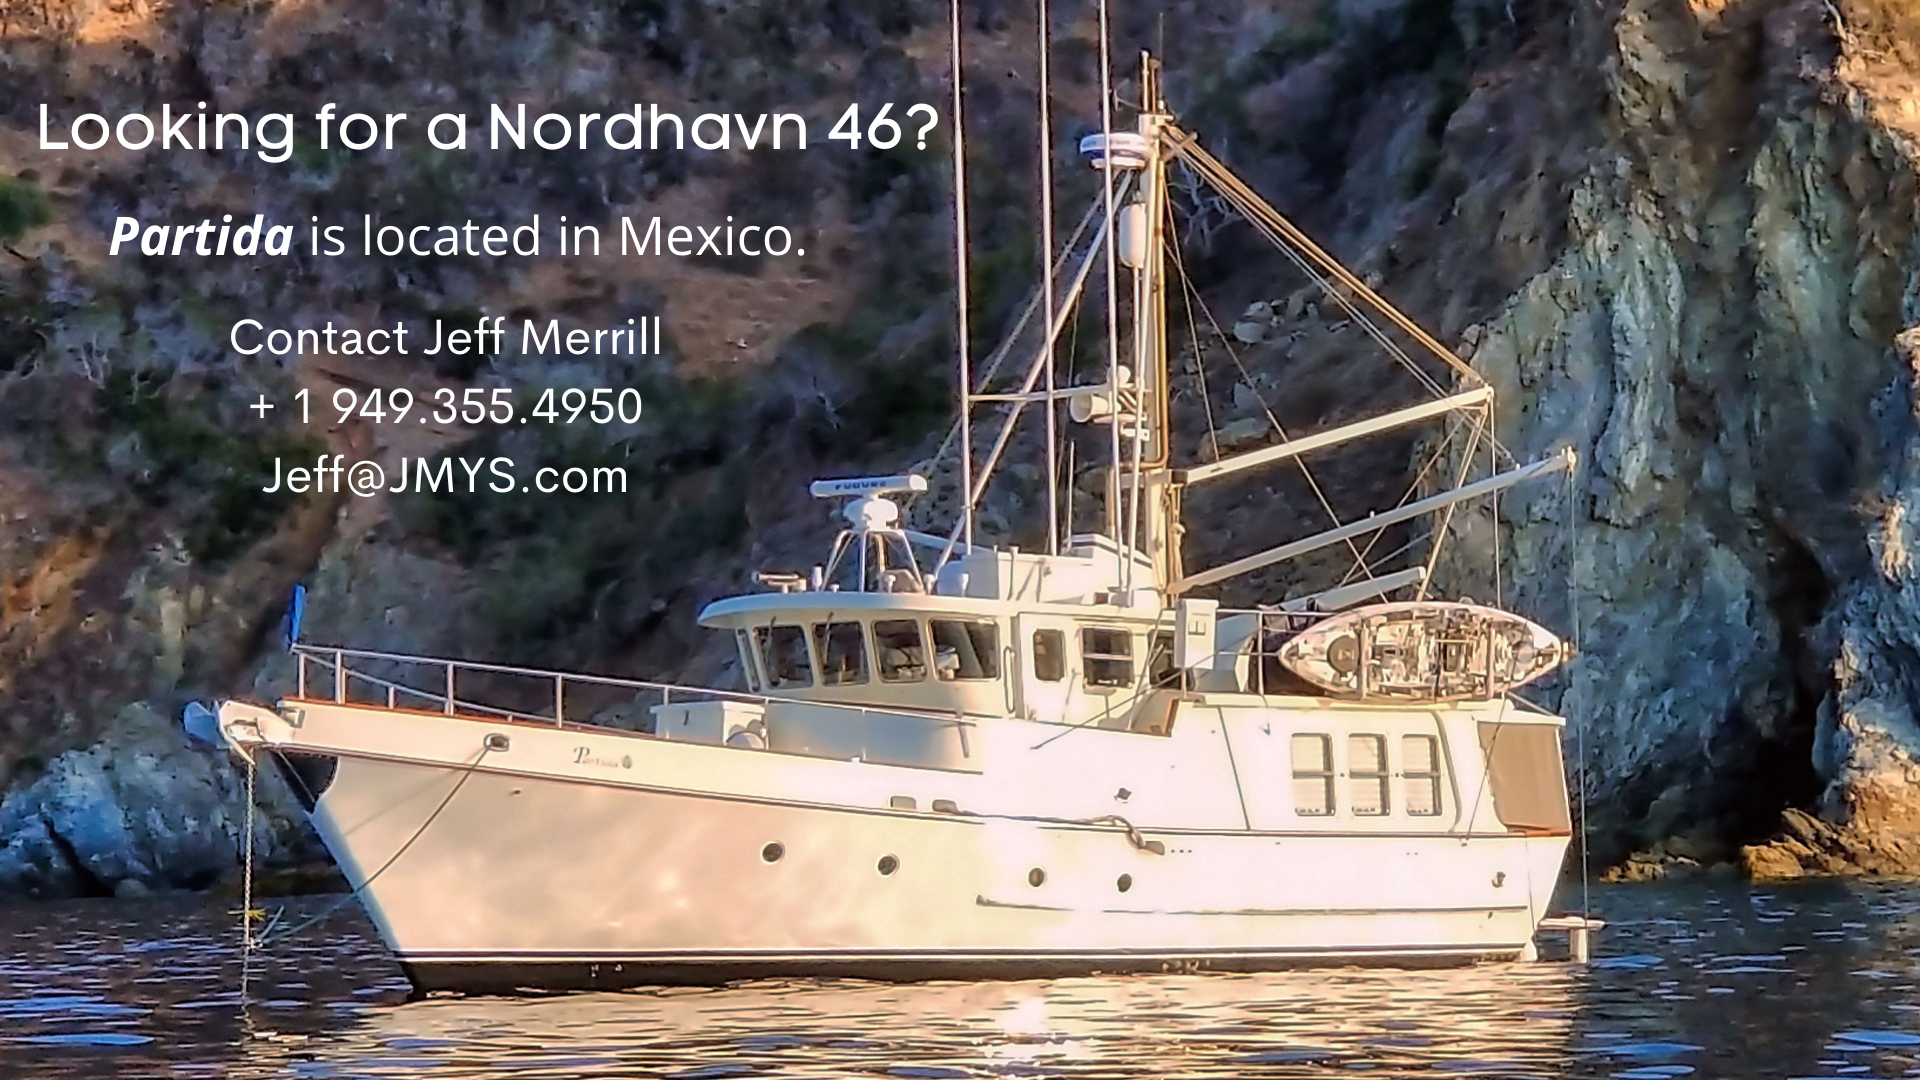 Looking for a Nordhavn 46?